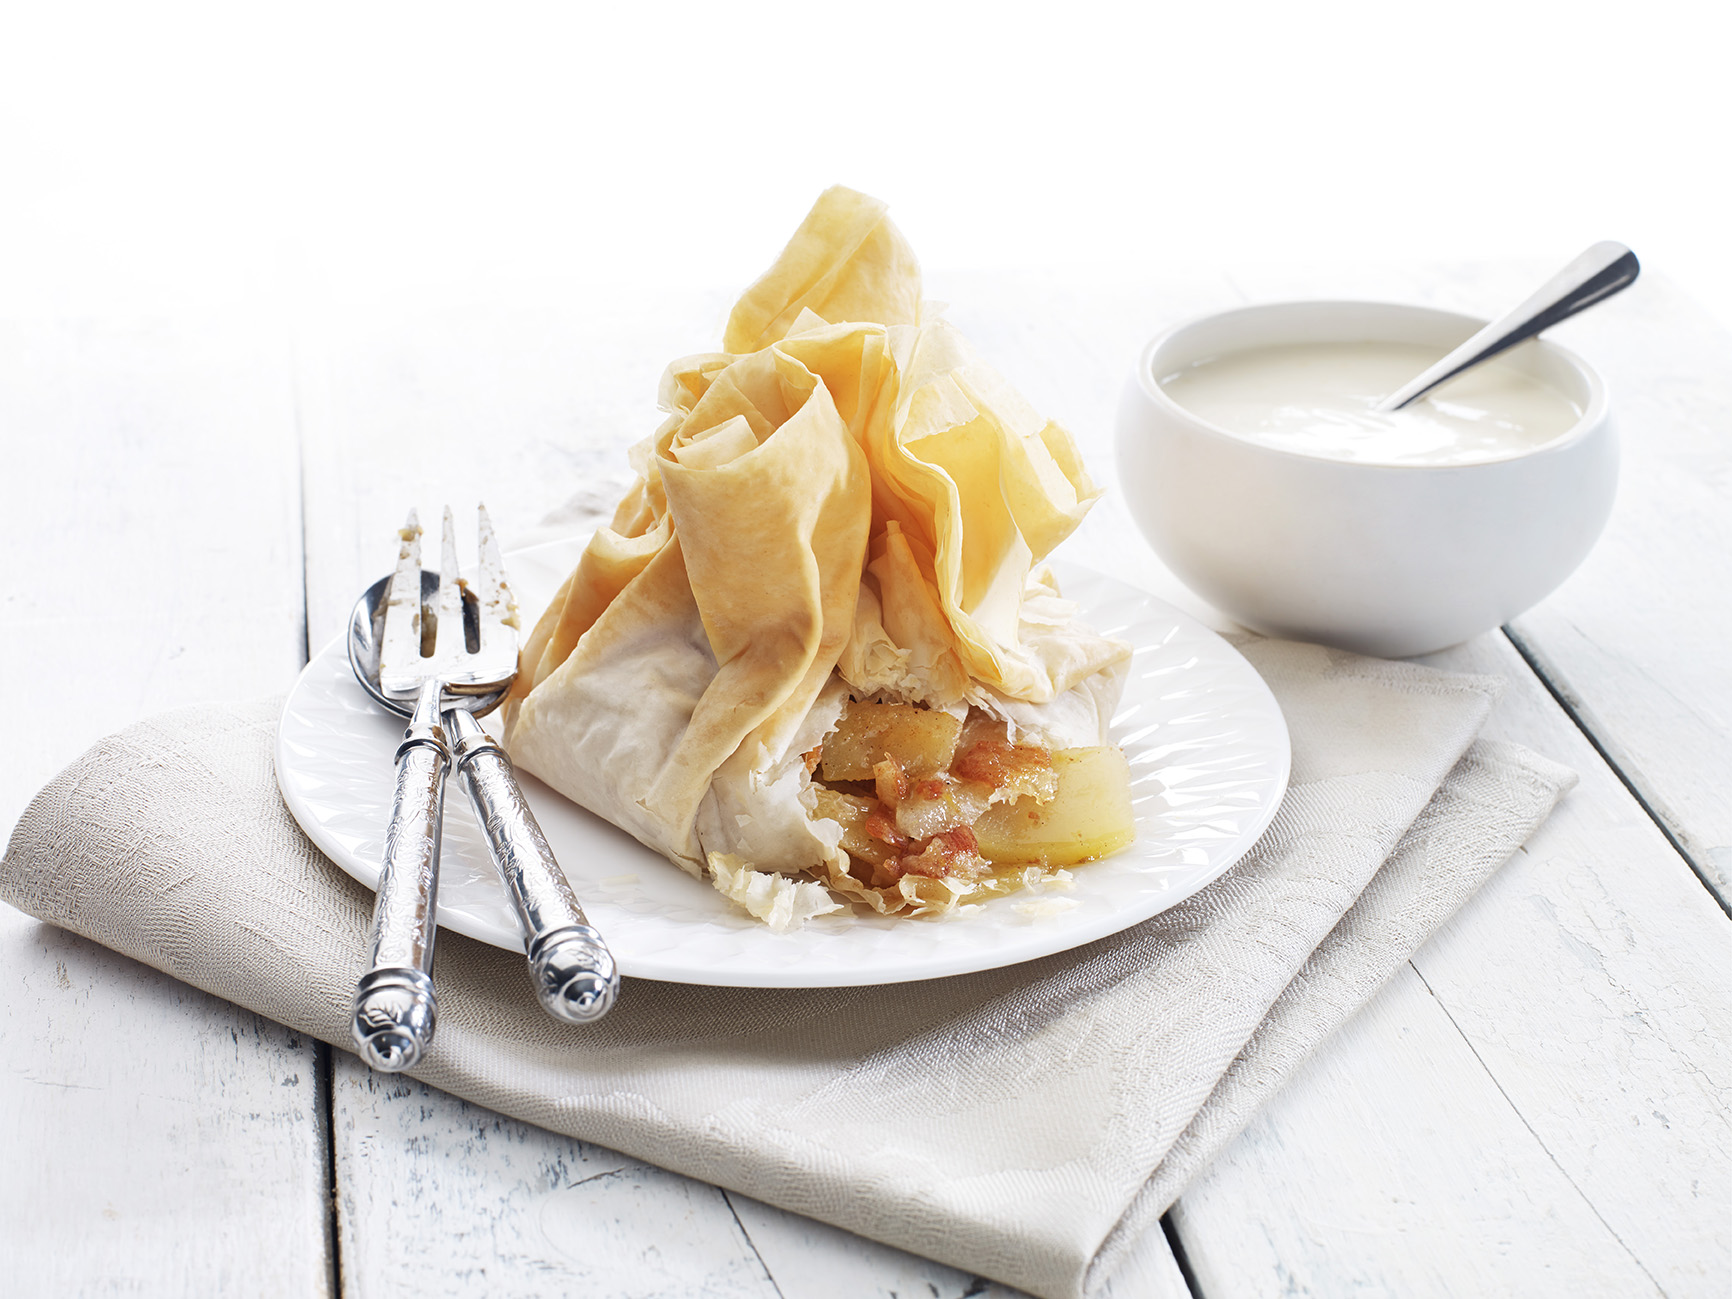 pear and date parcels